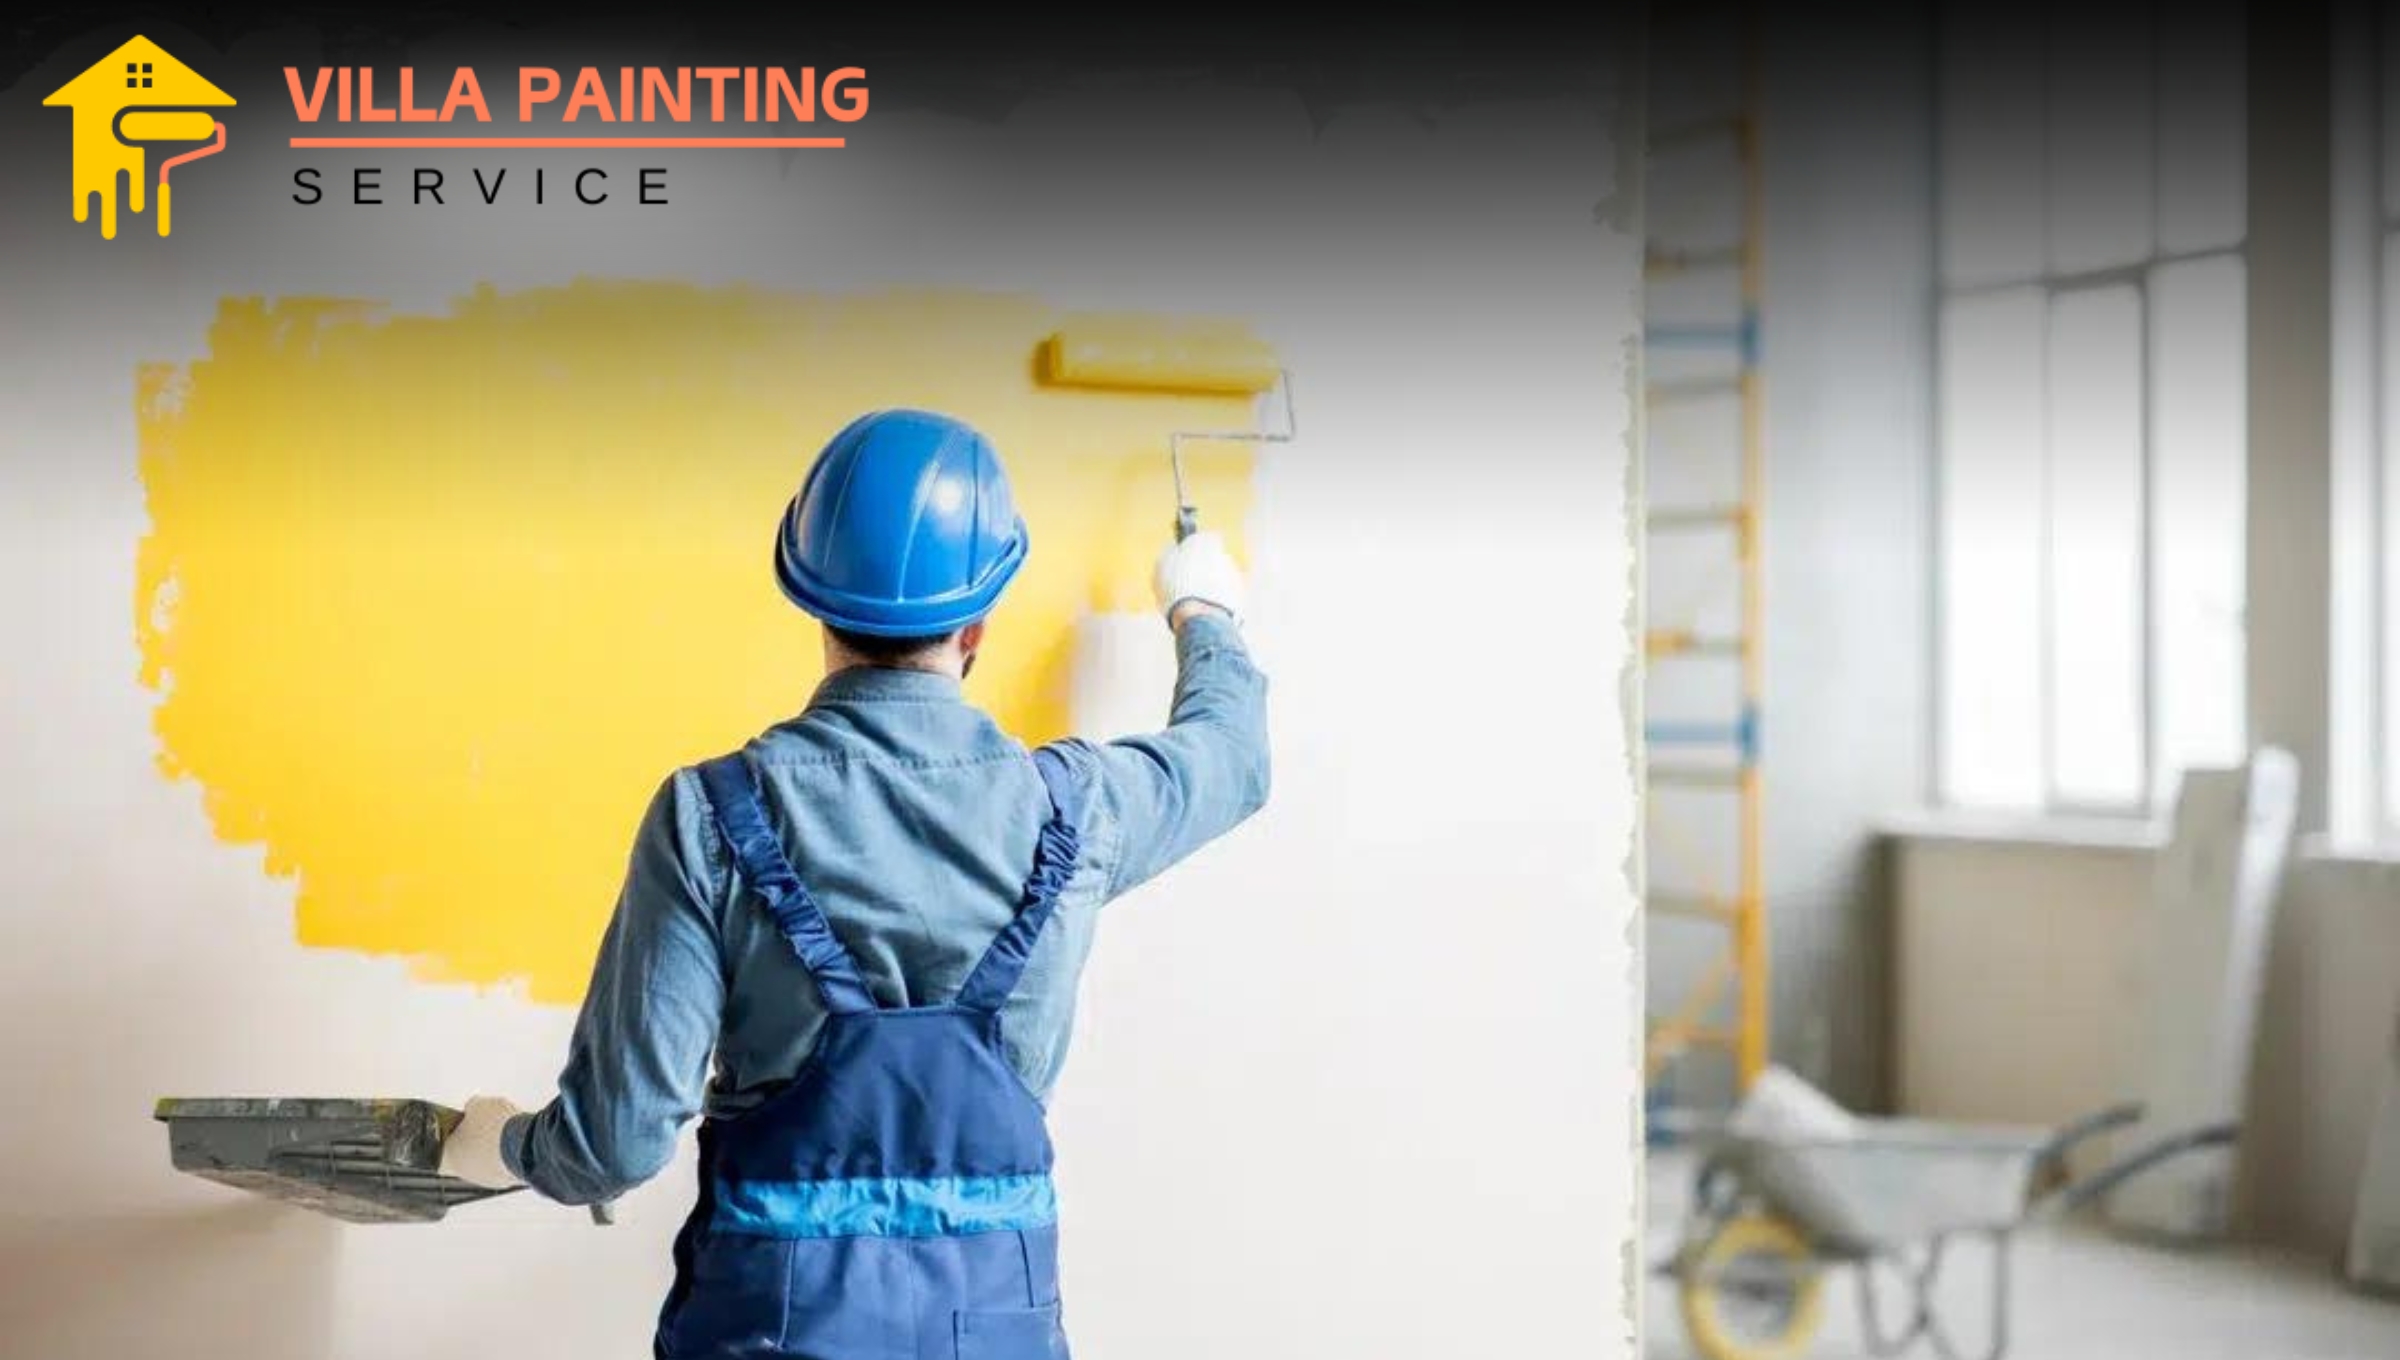 WALL PAINTING SERVICE IN DUBAI